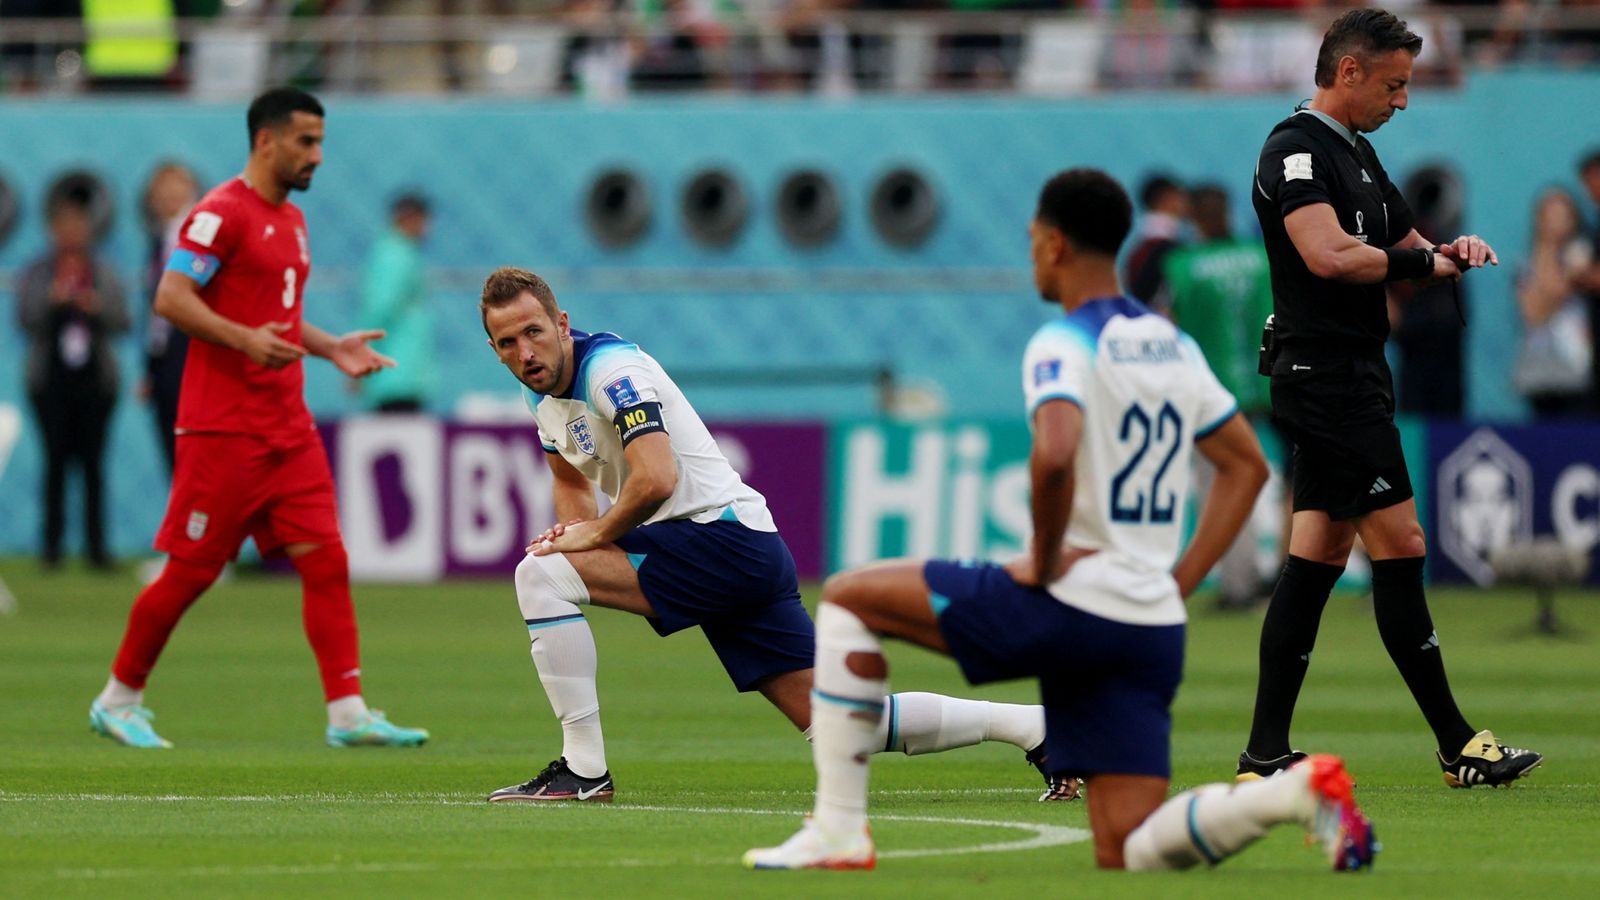 England's World Cup opens with rows over OneLove armband – as Iranian players make their own silent protest